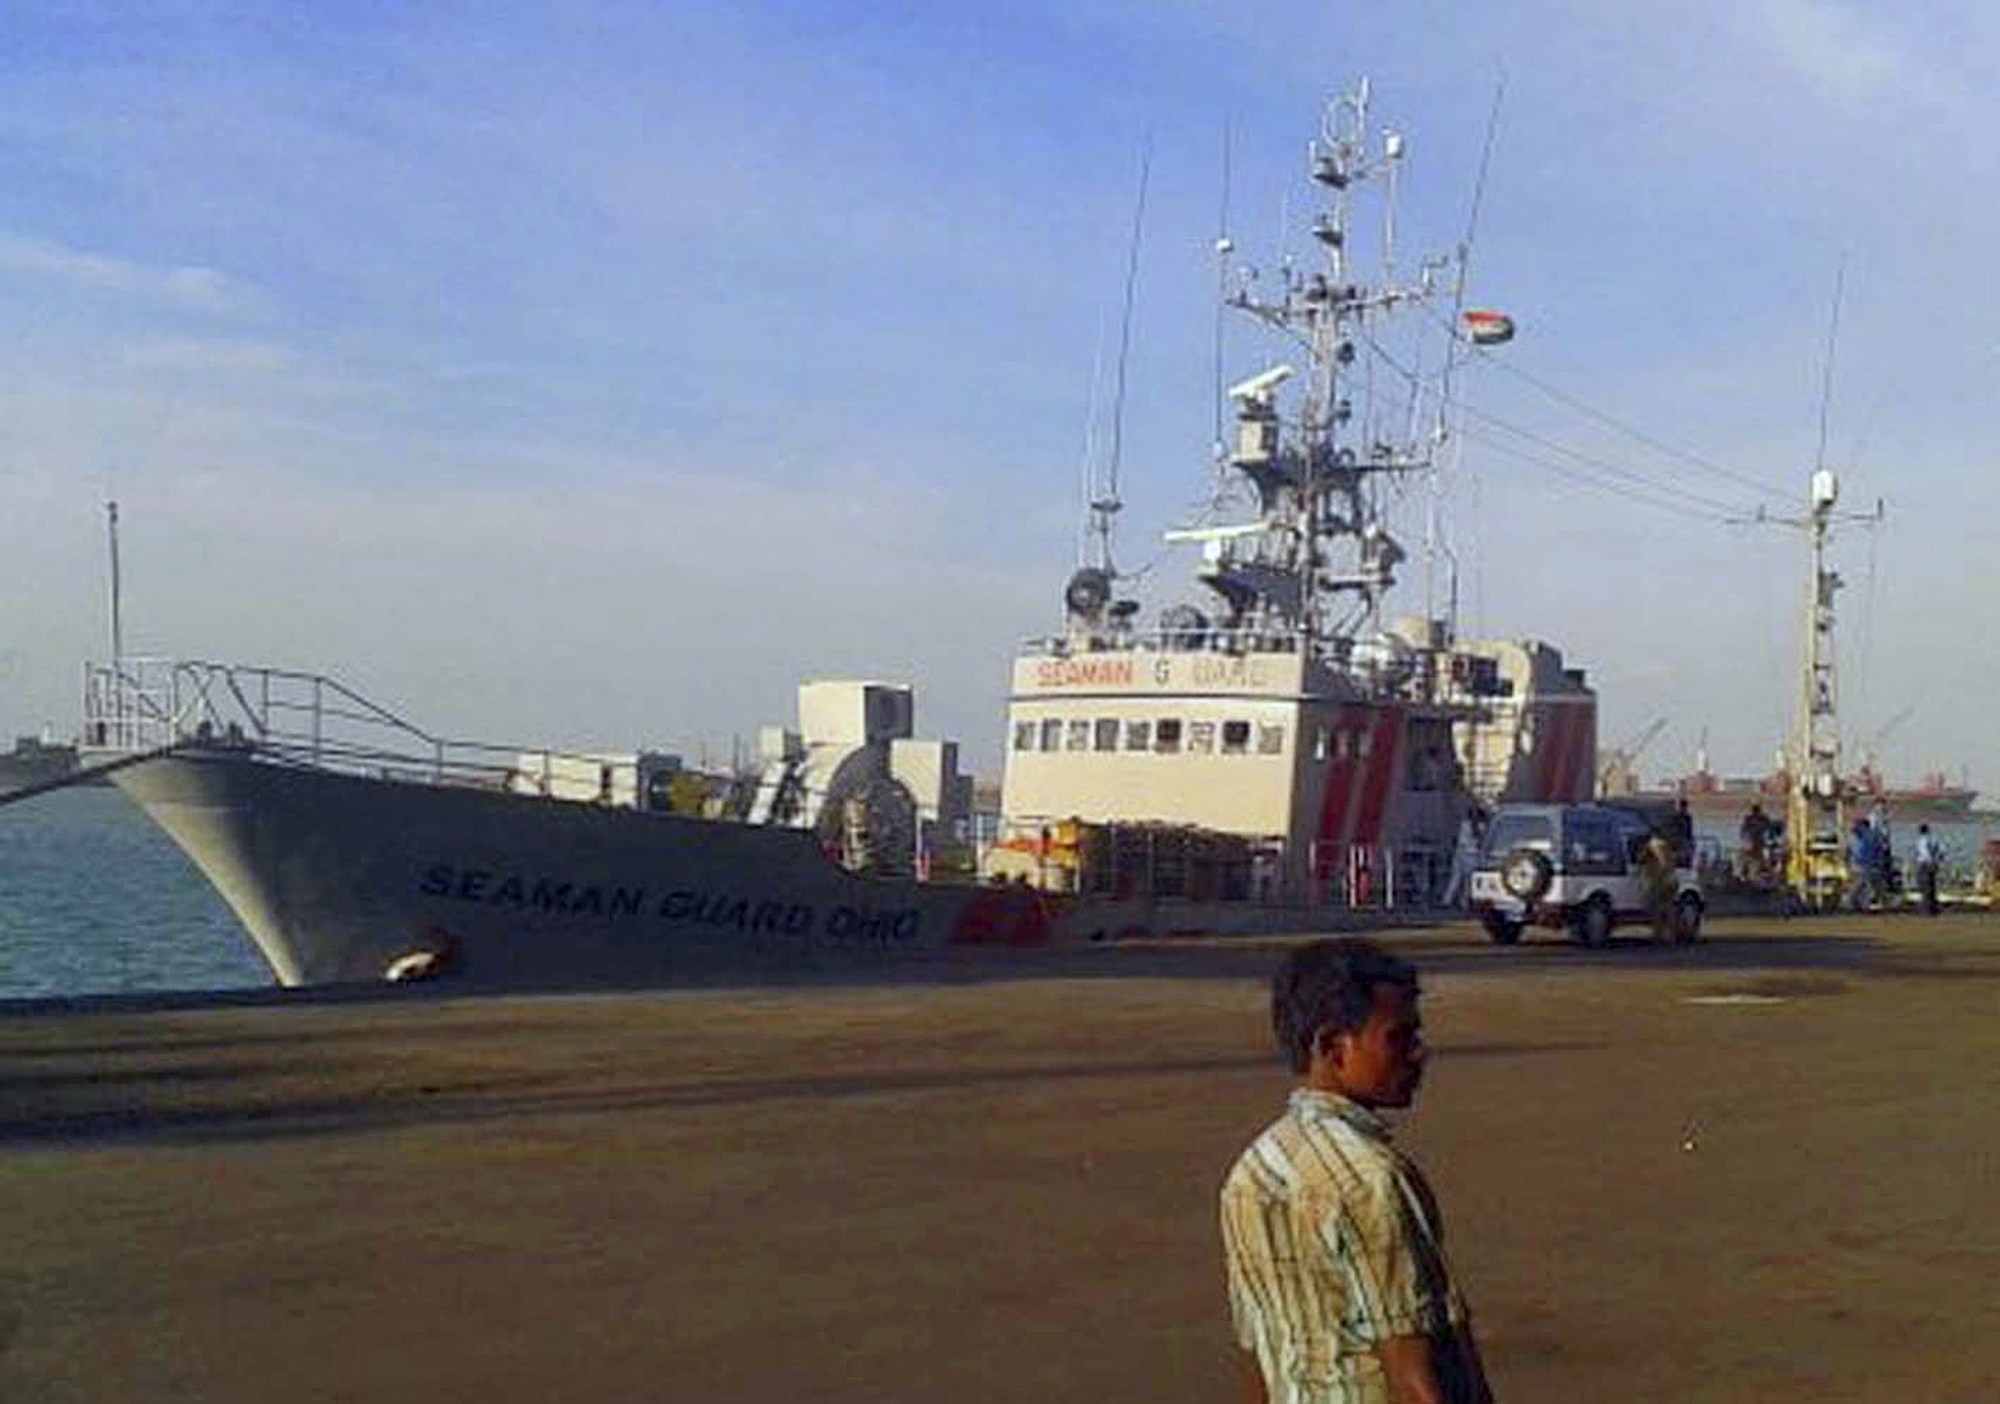 Associated Press
The U.S.-owned ship MV Seaman Guard Ohio is detained at the port of Tuticorin in the state of Tamil Nadu, India.